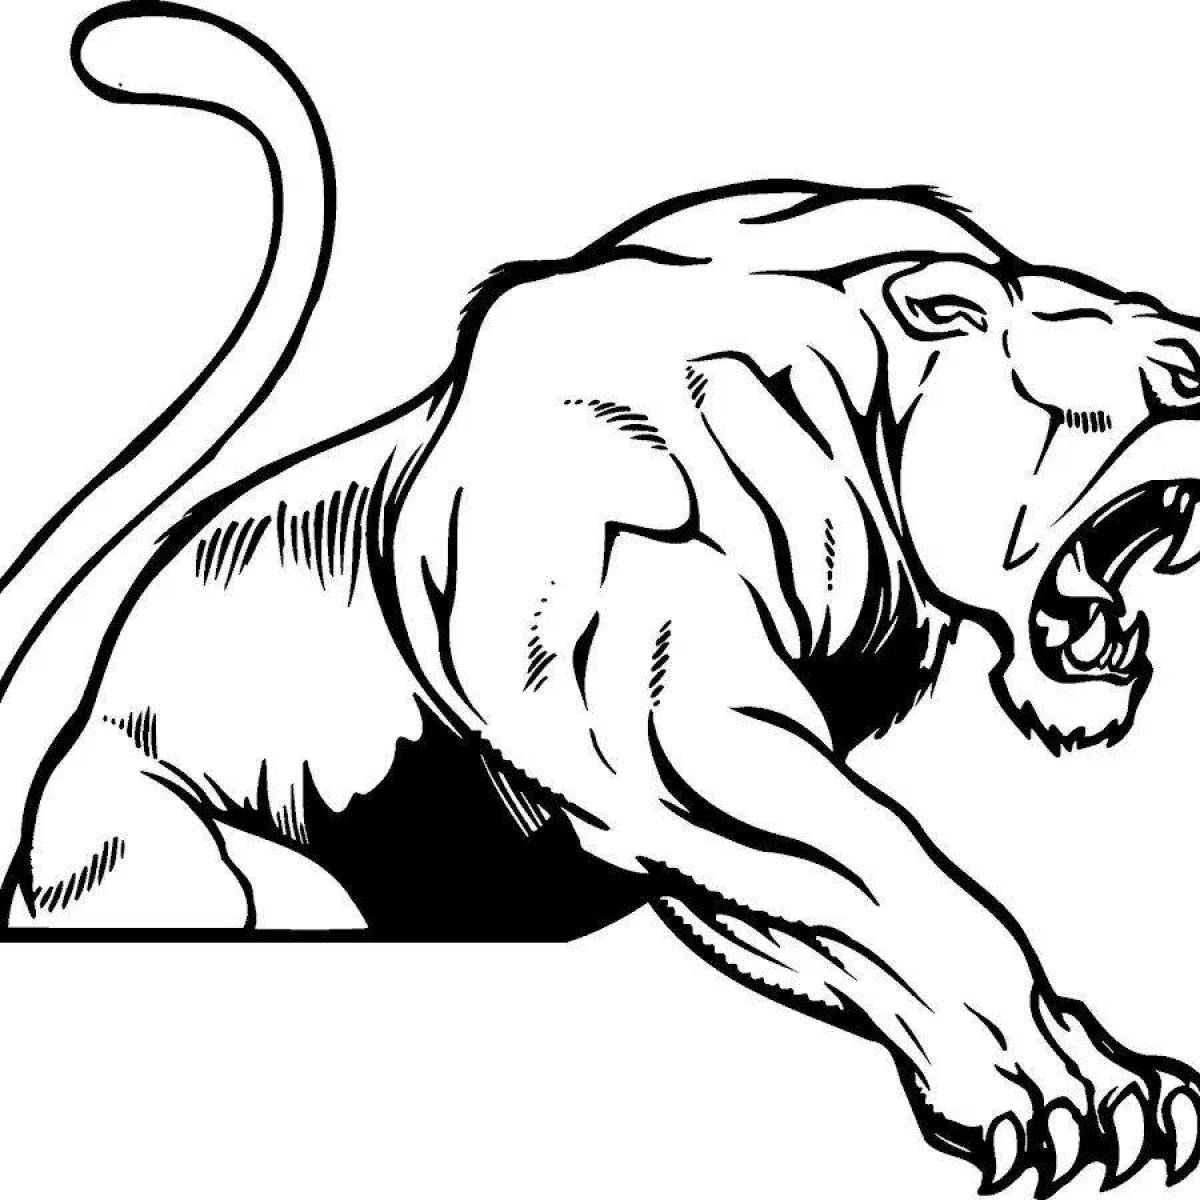 Adorable saber-toothed tiger coloring book for kids